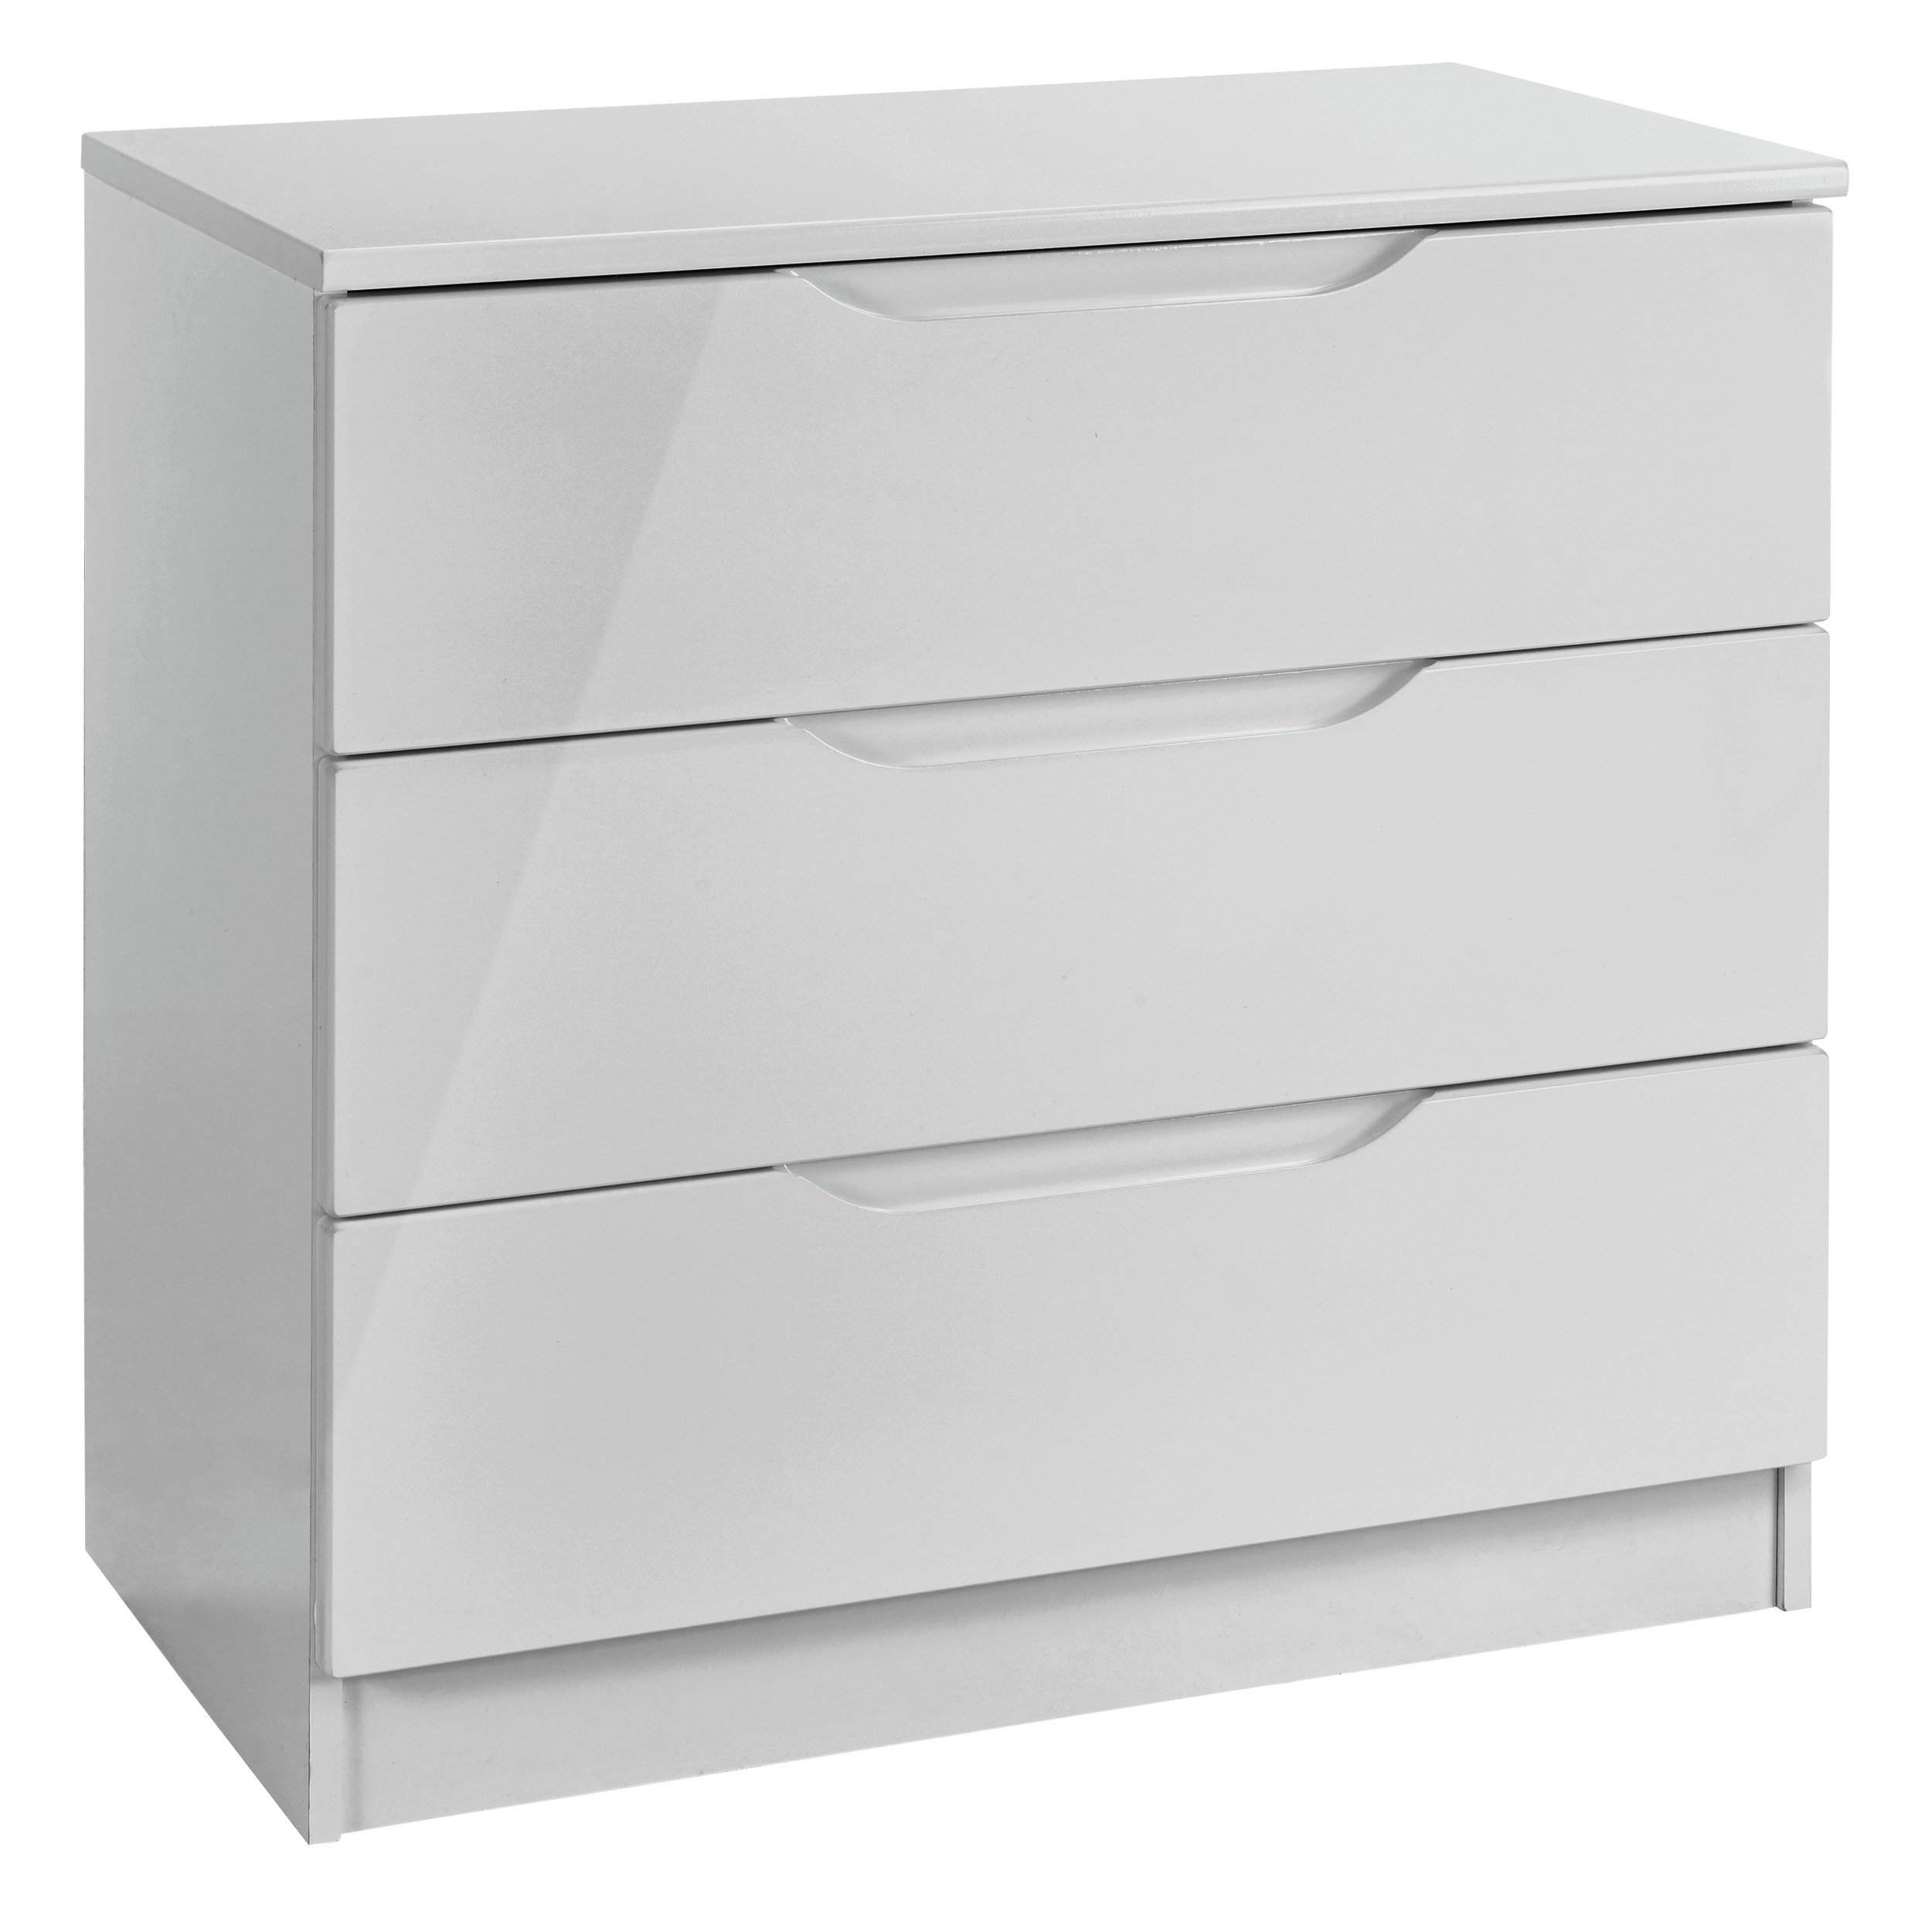 One Call Furniture Legato 3 Drawer Chest With Contemporary Cashmere Gloss 250 00 Best Price